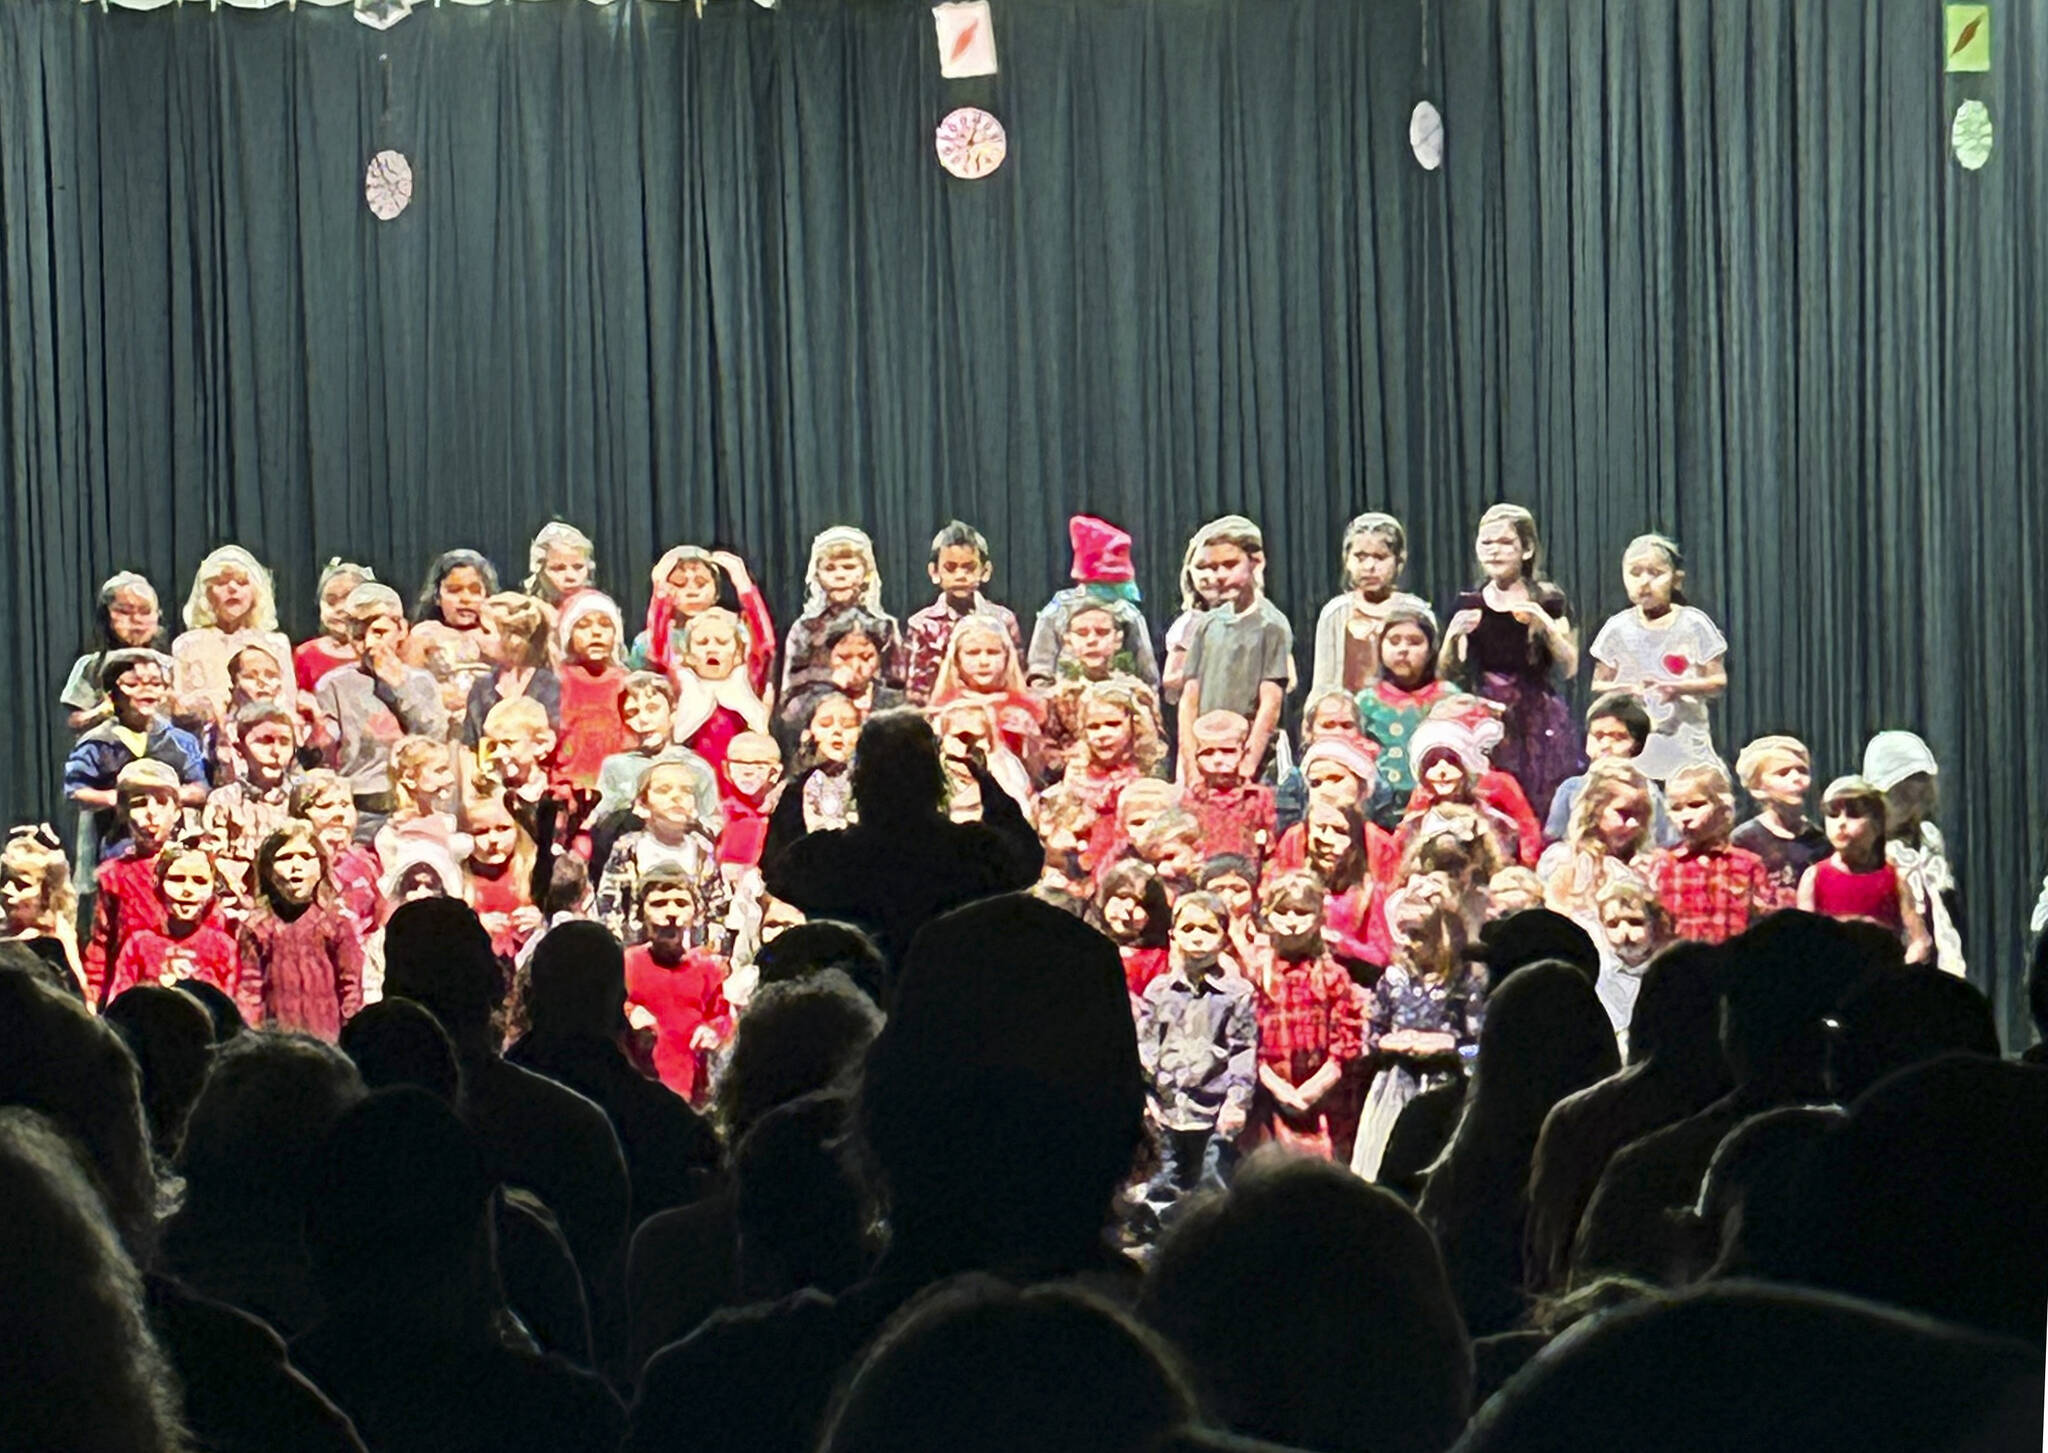 It was a packed house for the Forks Elementary School Winter Concert. The group was under the direction of Becky Murillo. Submitted Photo